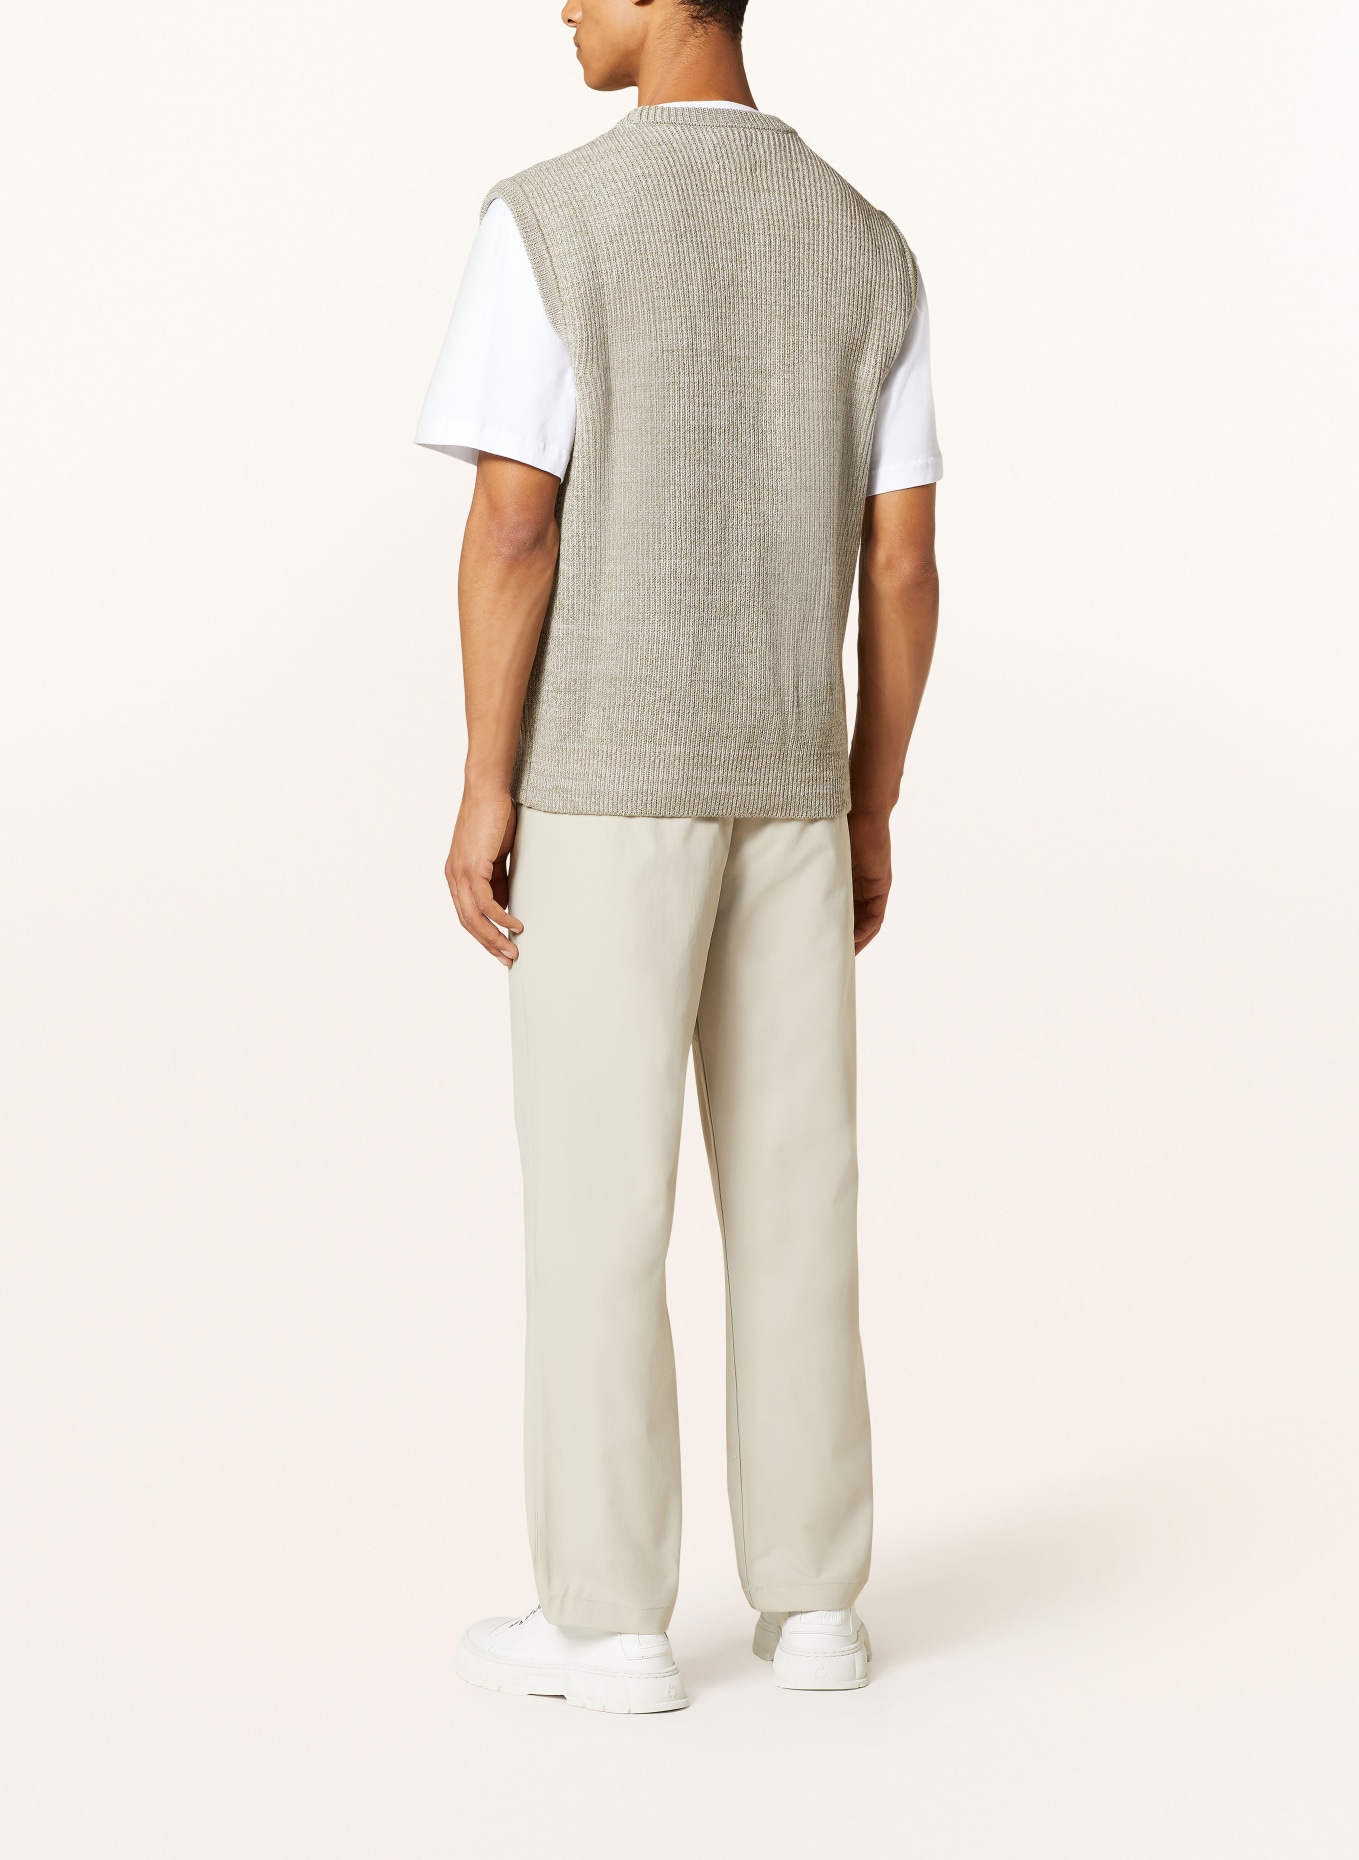 NORSE PROJECTS Sweater vest, Color: LIGHT GREEN/ CREAM (Image 3)